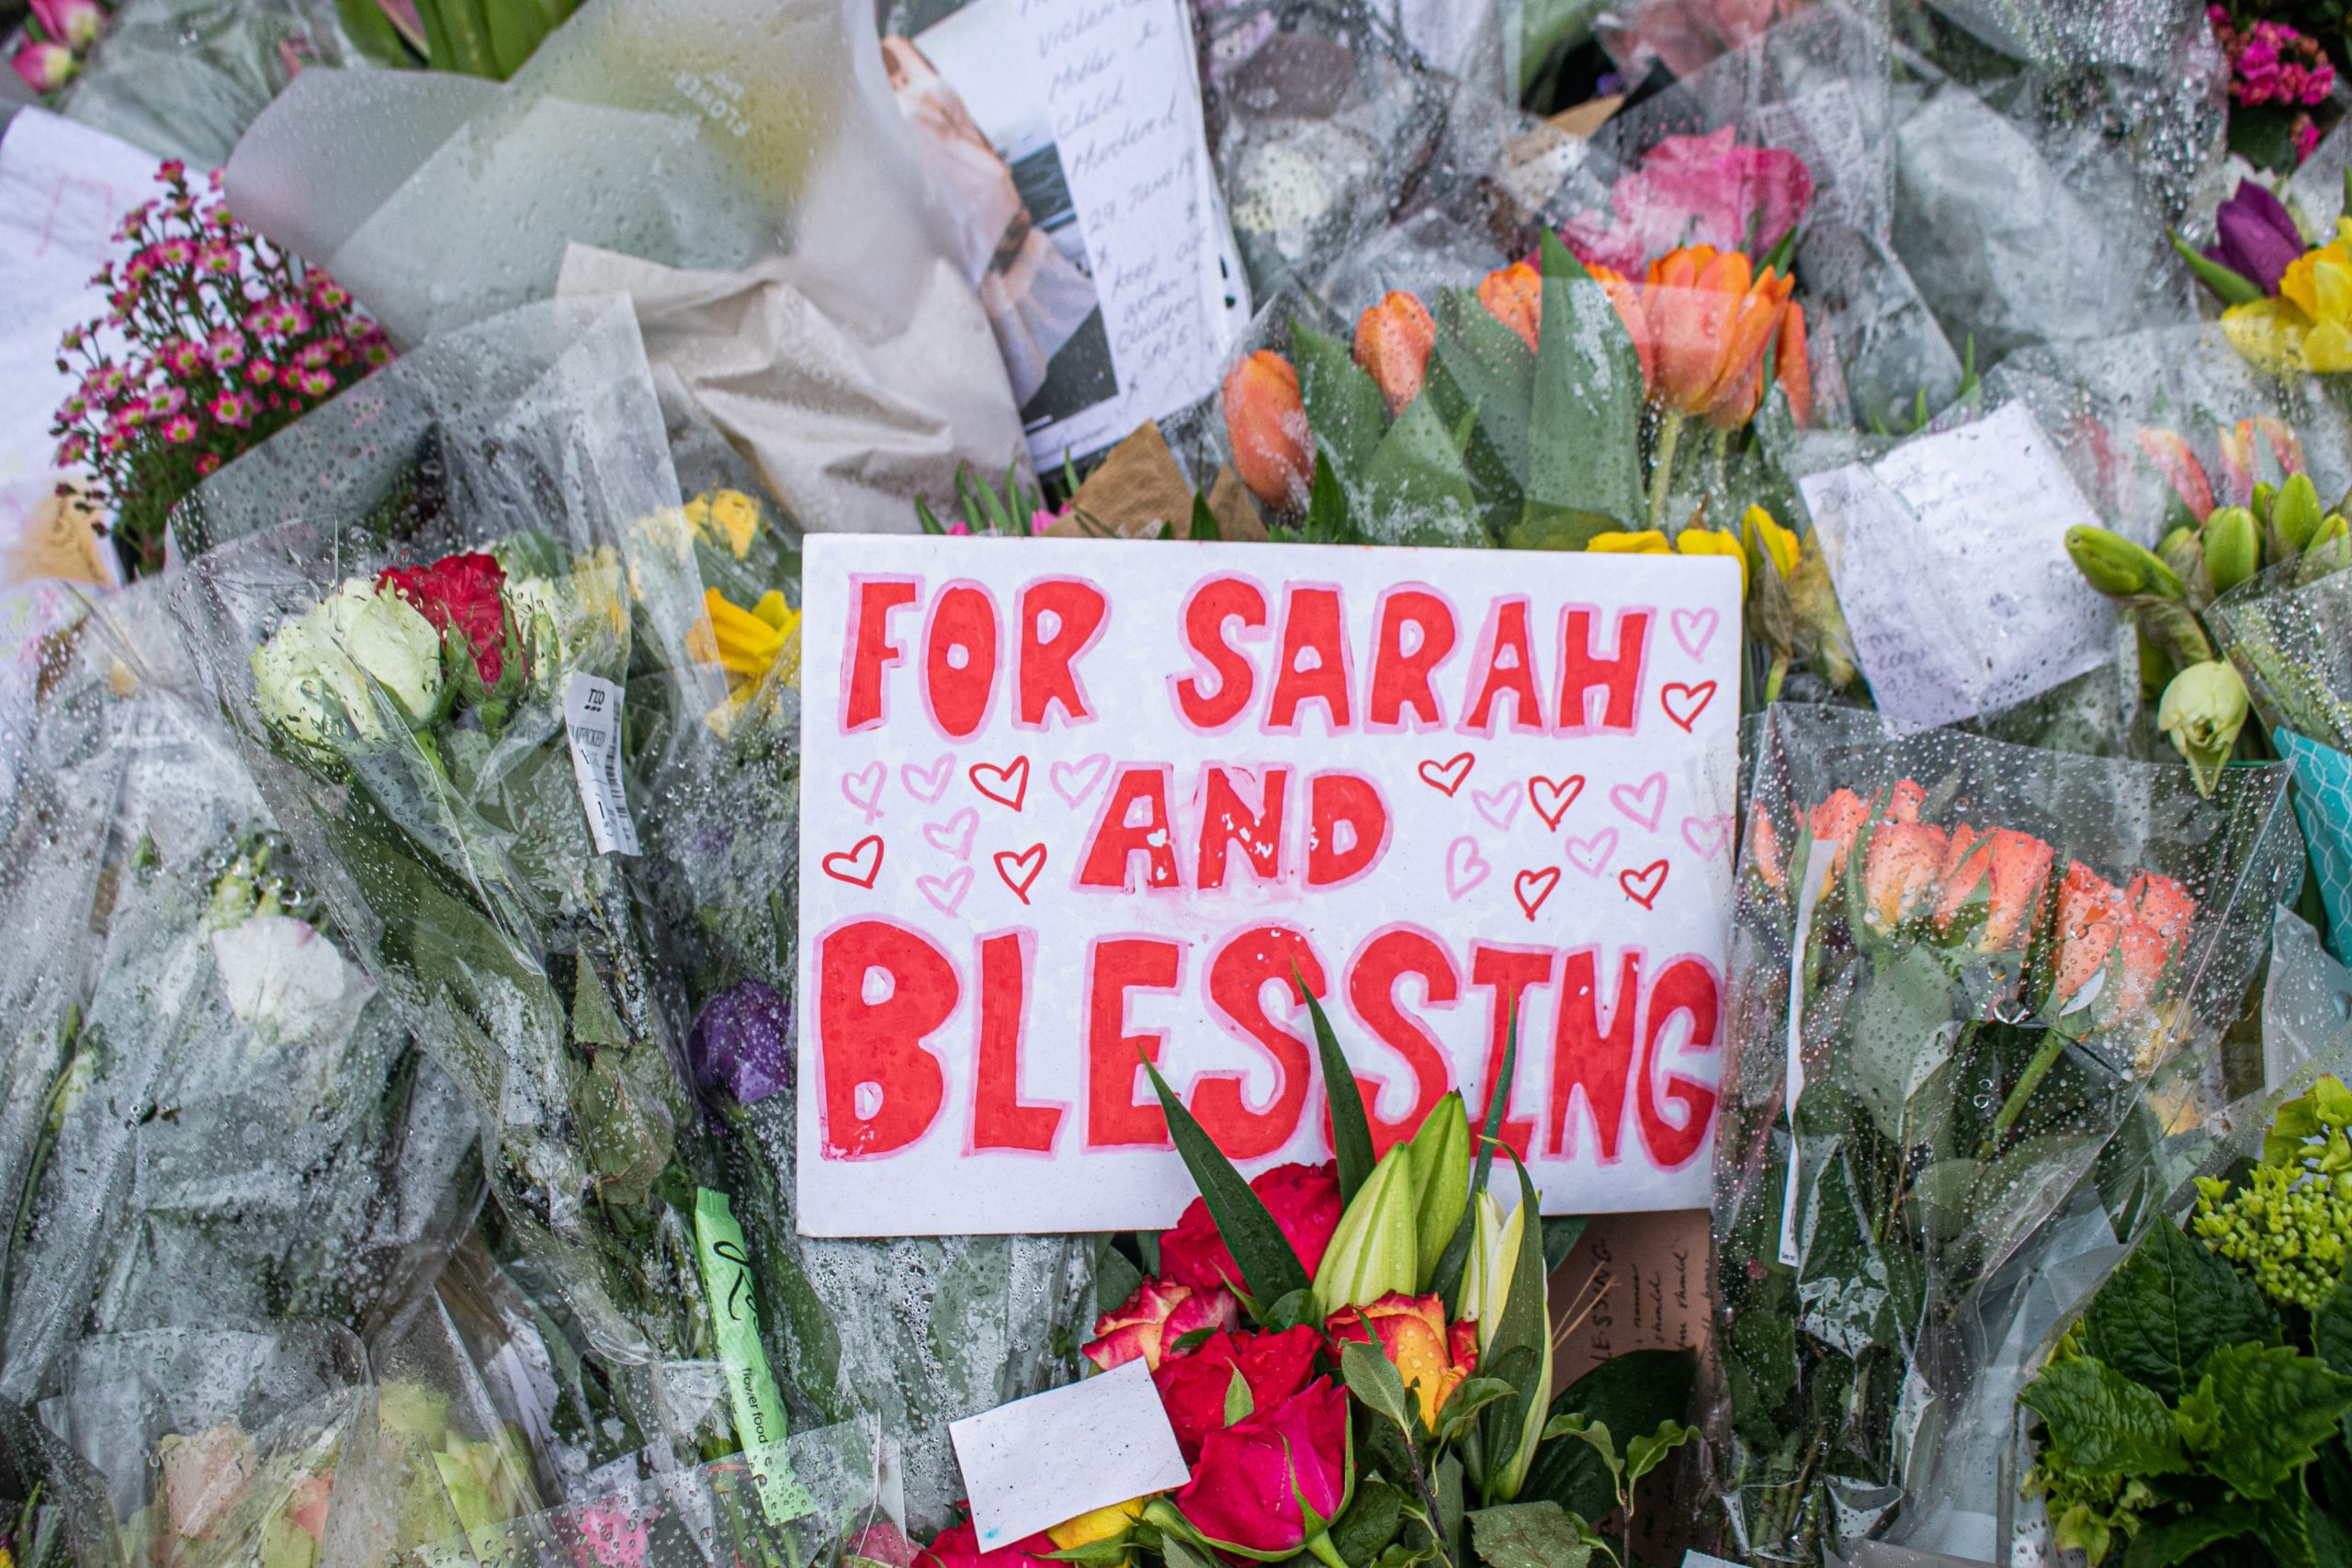 Flowers and sign saying "for Sarah and blessing".